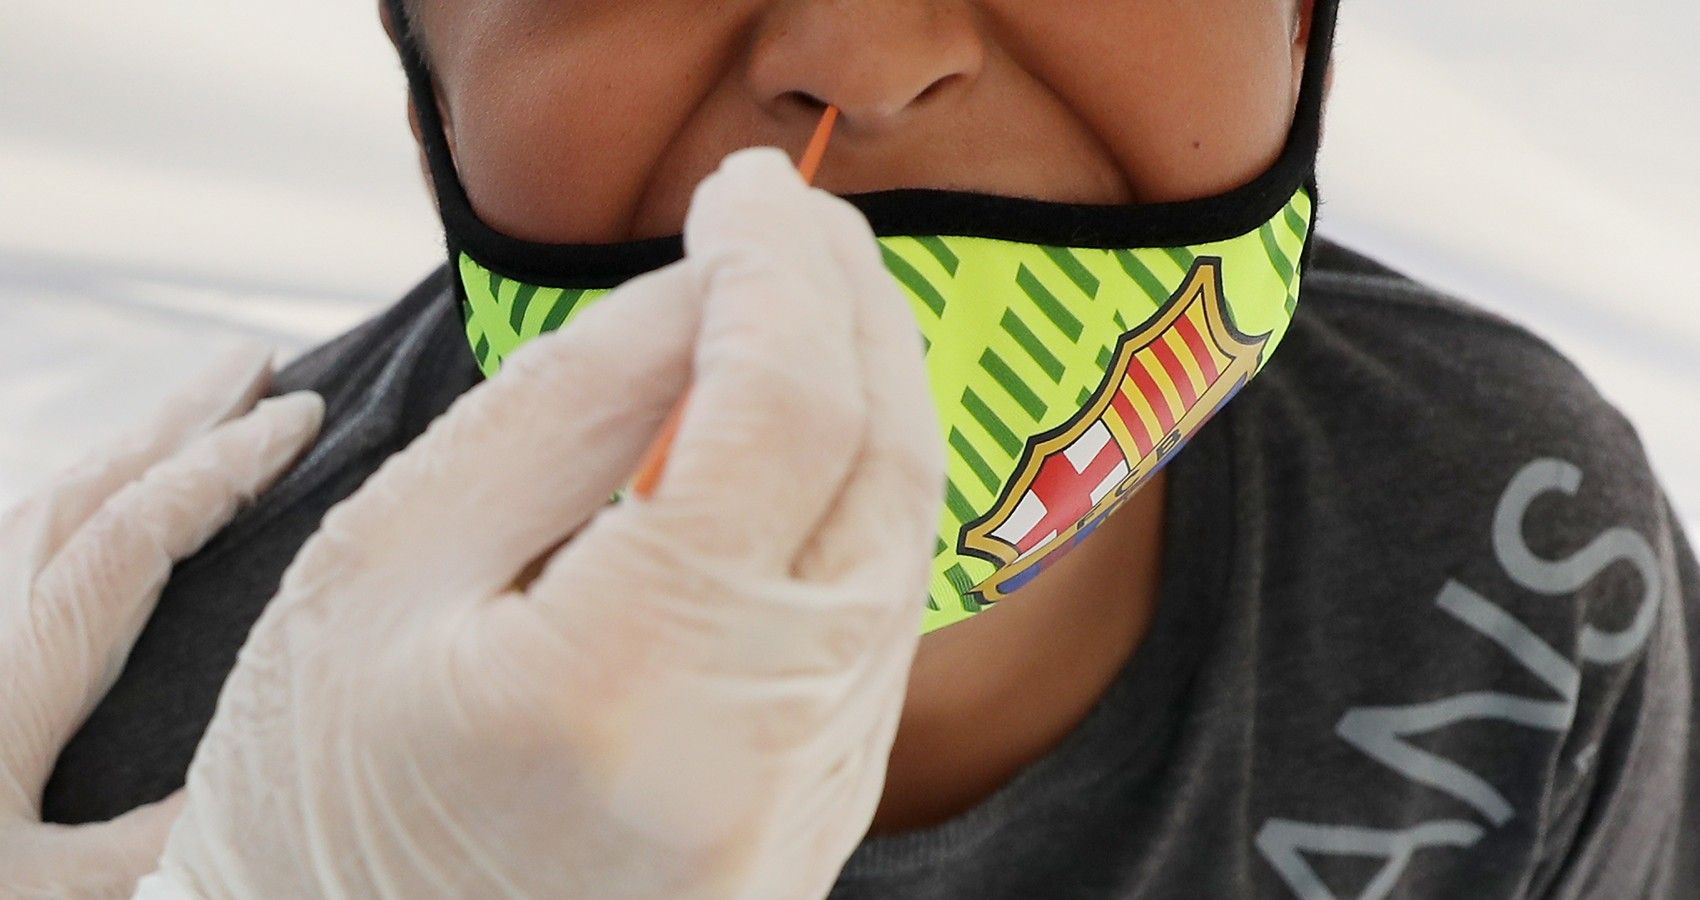 A child getting tested for Covid-19